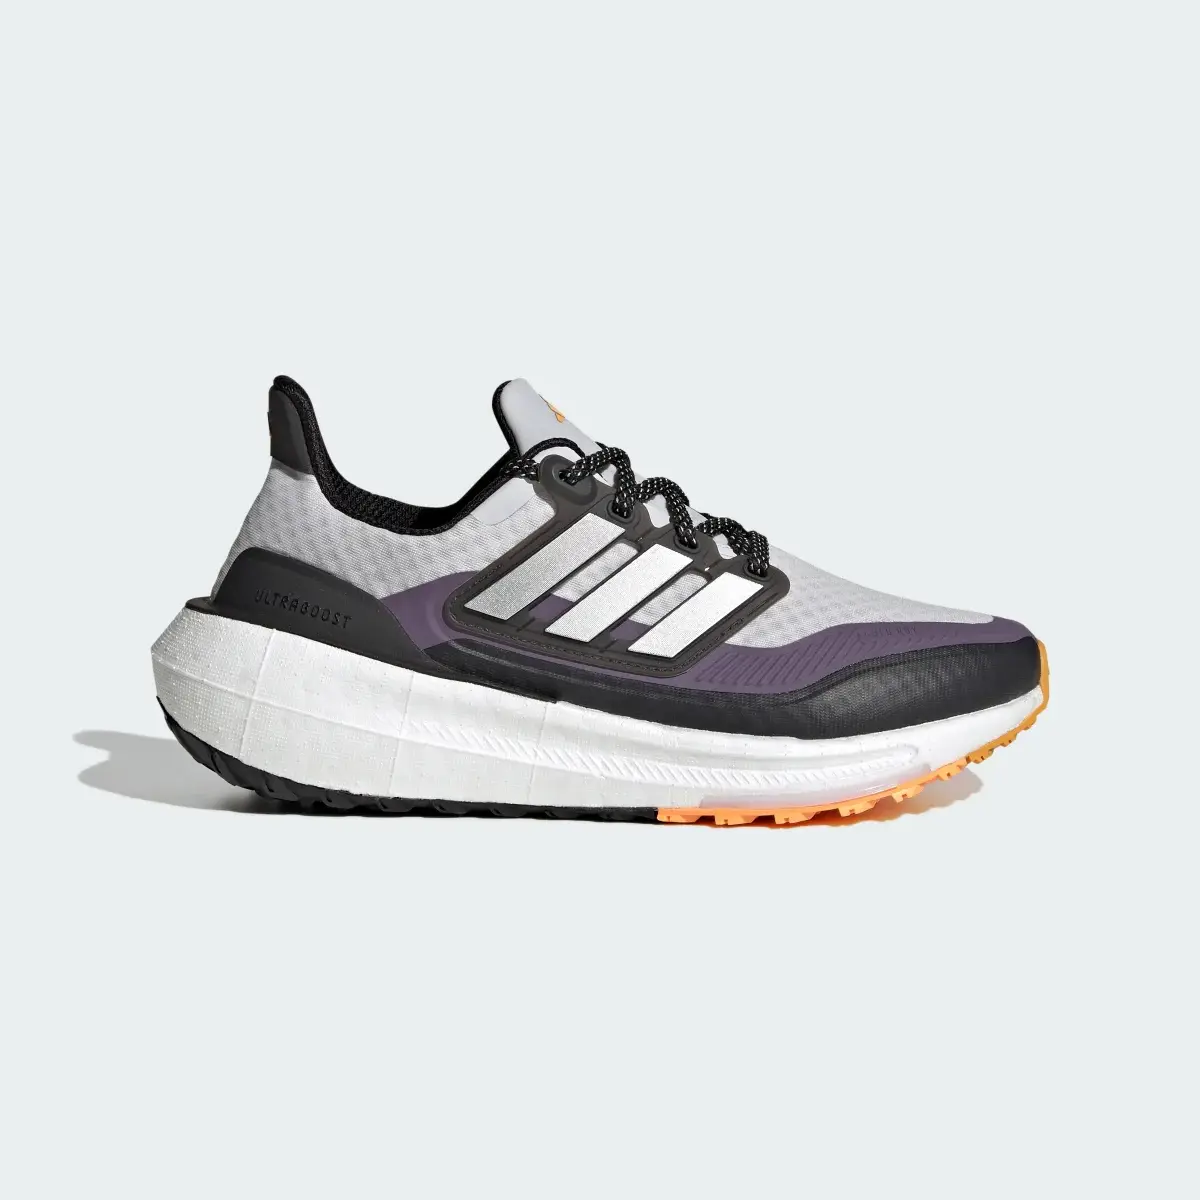 Adidas Ultraboost Light COLD.RDY 2.0 Shoes. 2